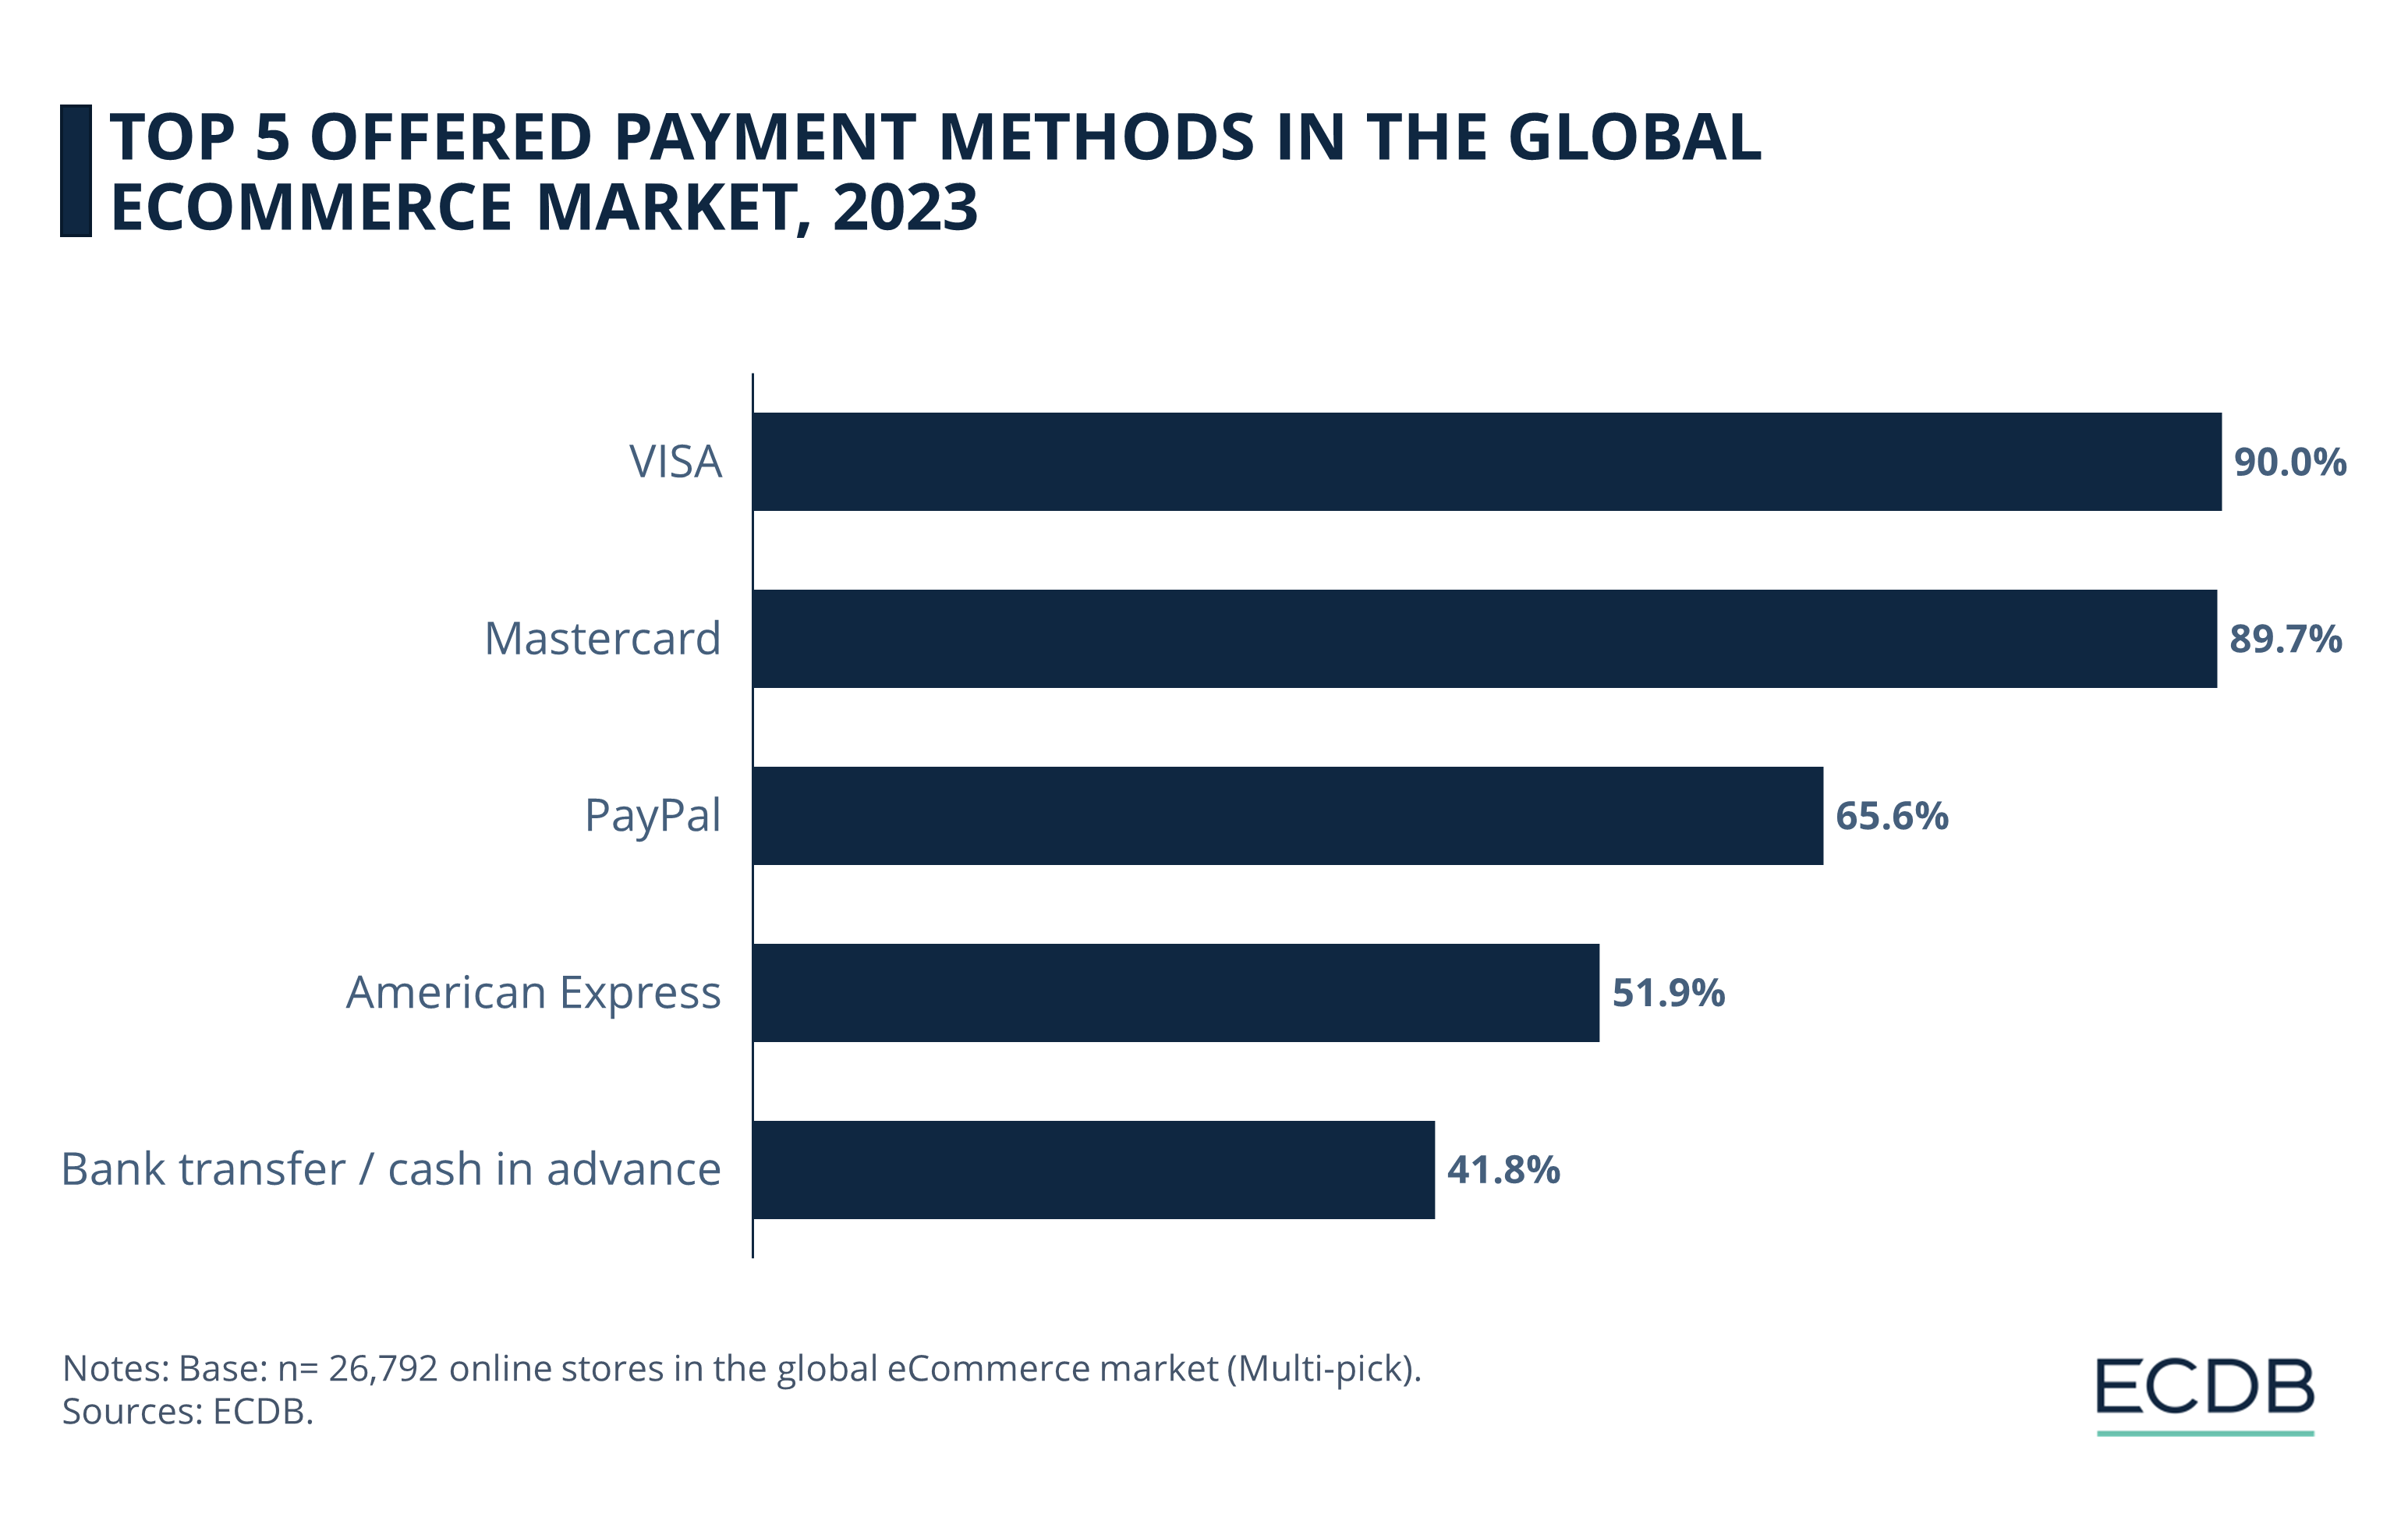 Top 5 Offered Payment Methods in the Global eCommerce Market, 2023